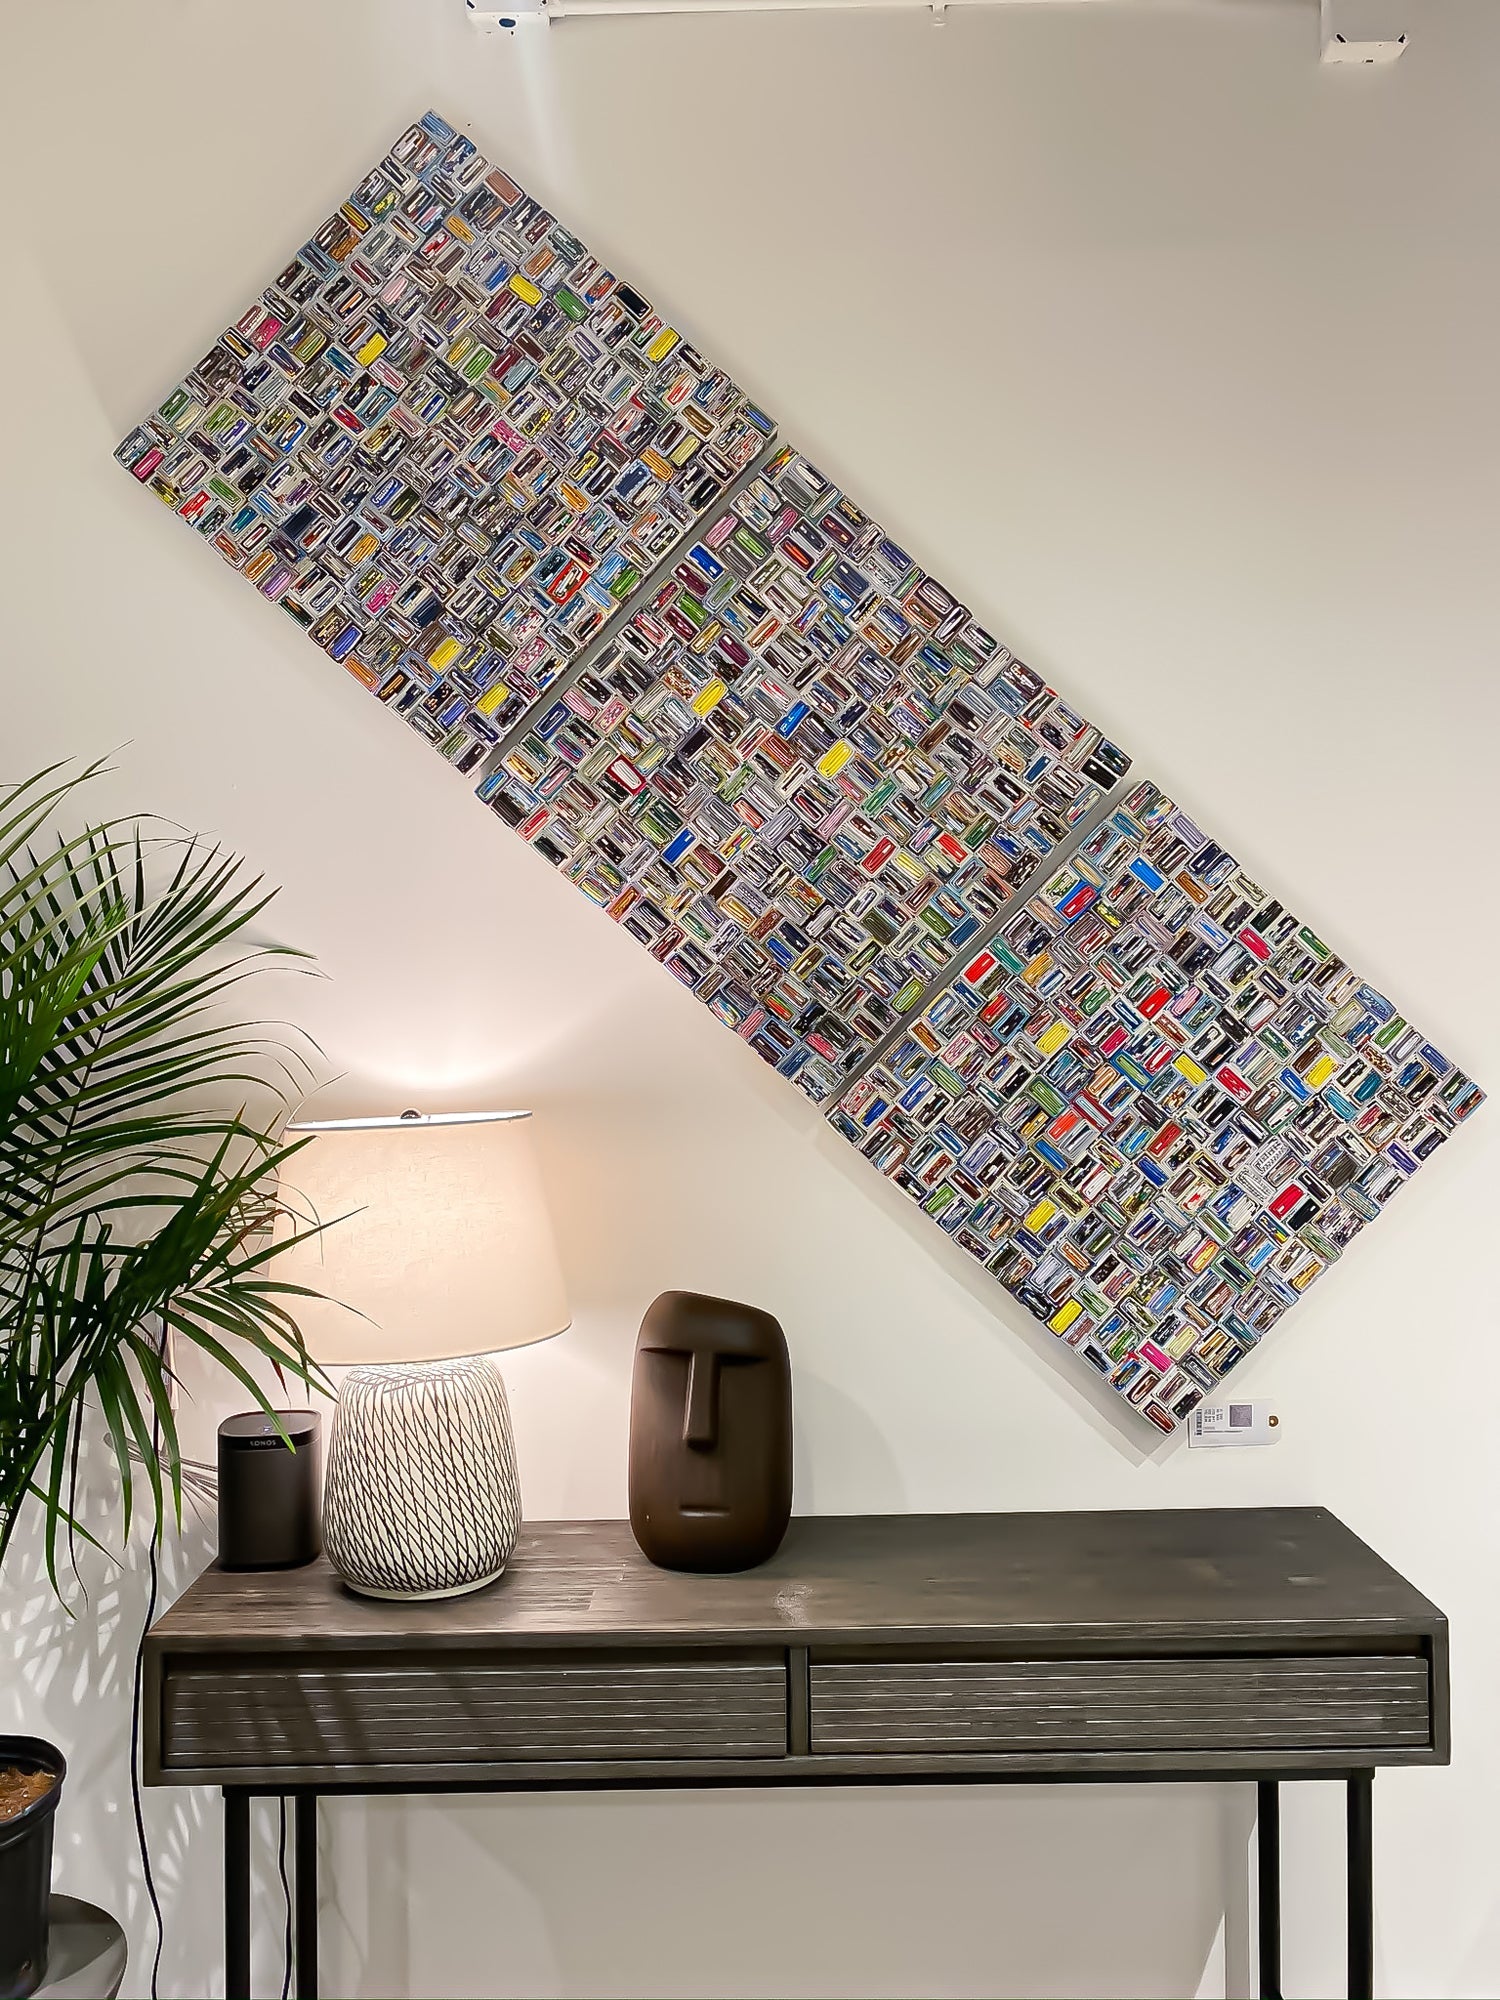 D-Bodhi Wall Deco Kaleidoscope 24 by LH Imports